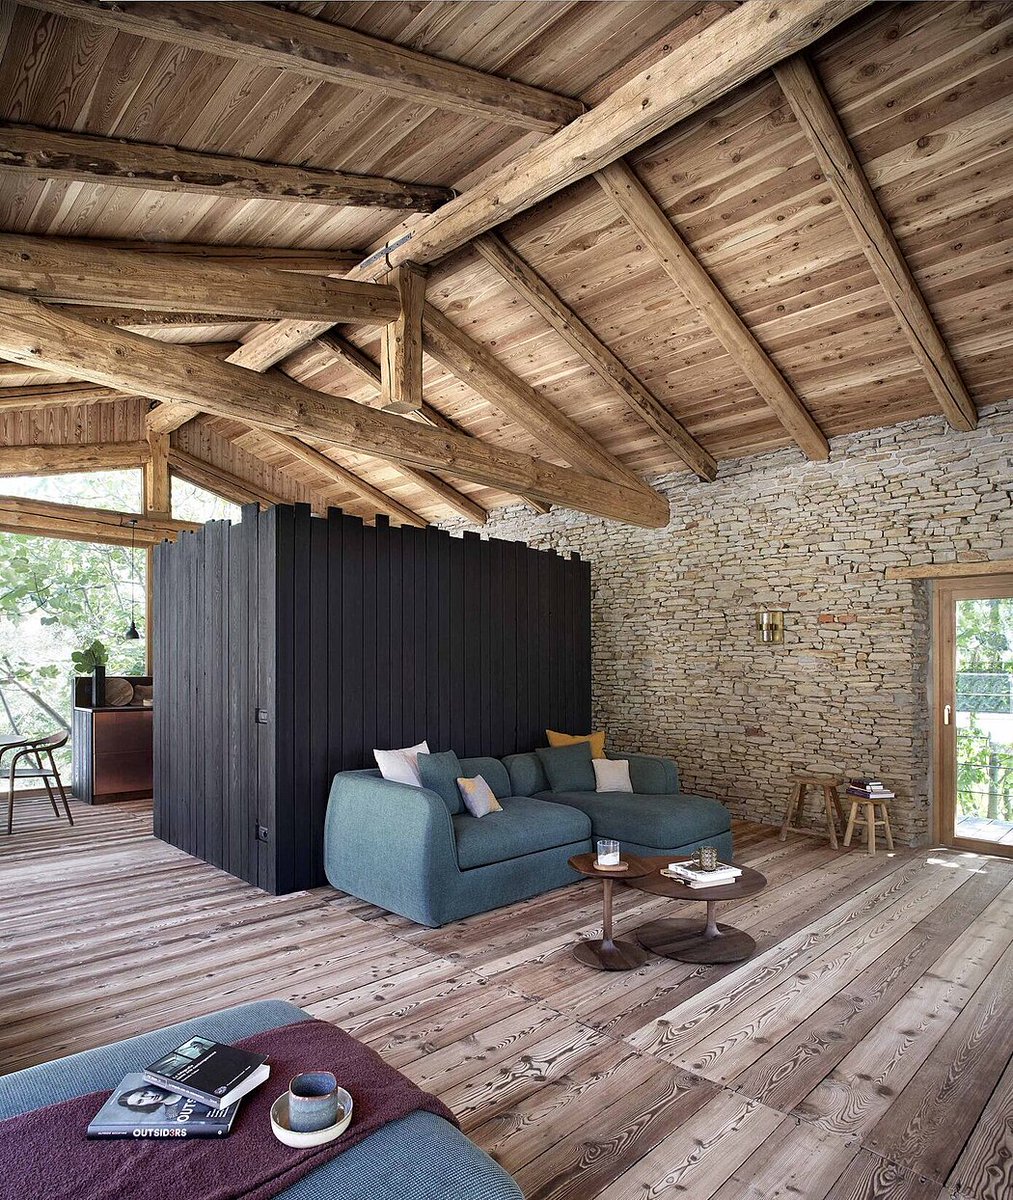 Cascina_B: Officina82's Craftsmanship Shines in This Italian Hideaway 

homeadore.com/2023/10/24/cas…